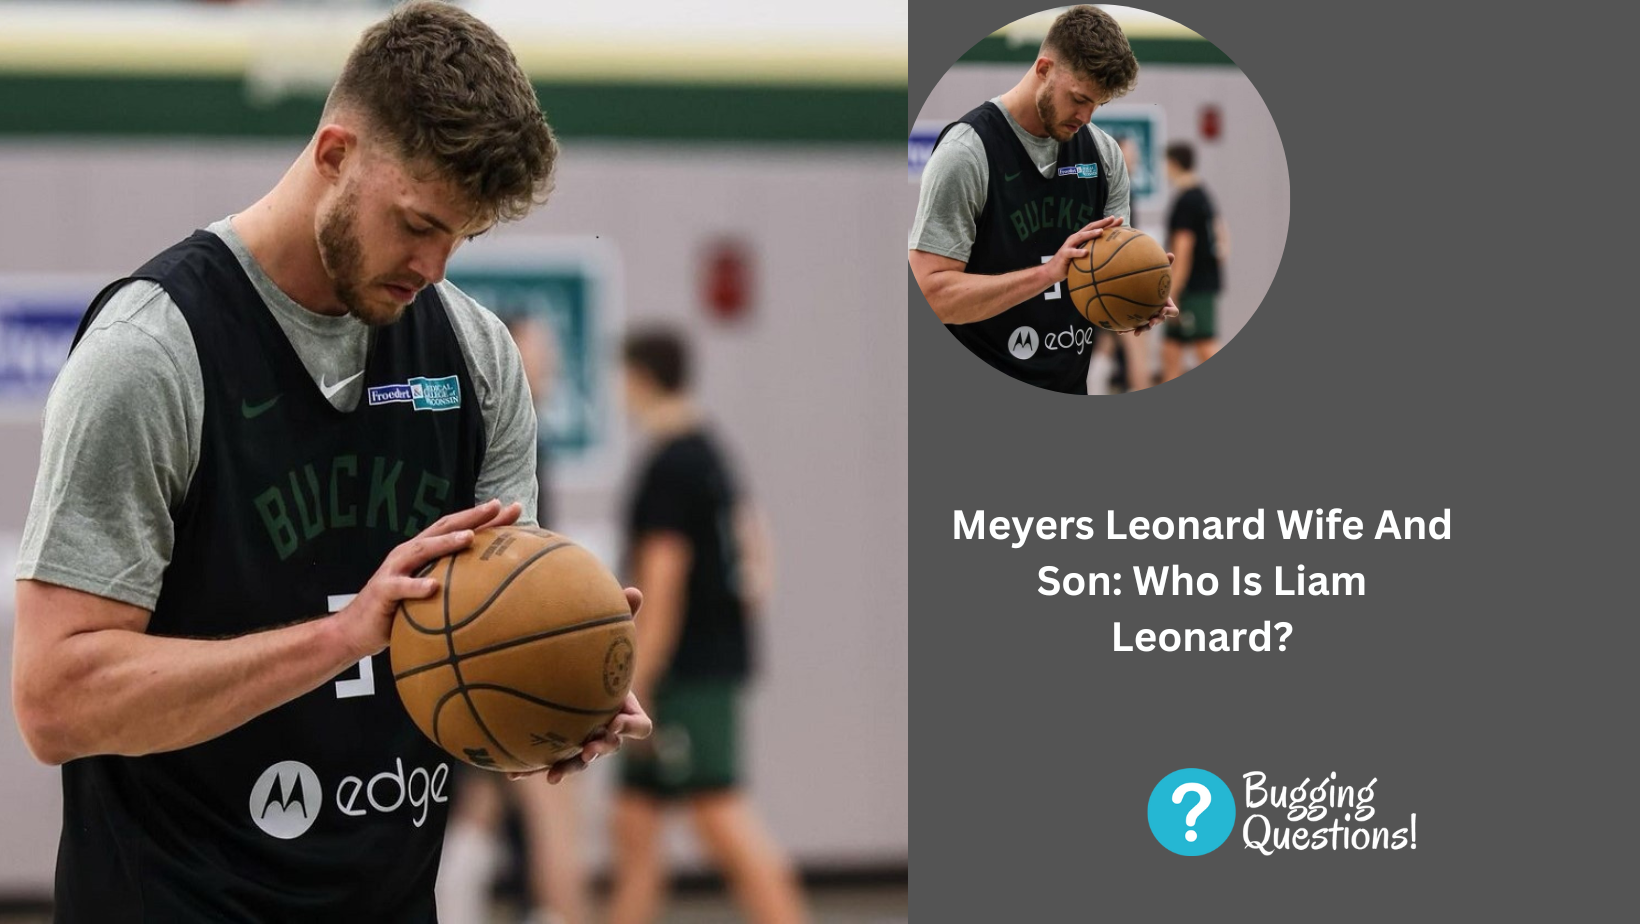 Meyers Leonard Wife And Son: Who Is Liam Leonard? Family Background And Personal Life Explored